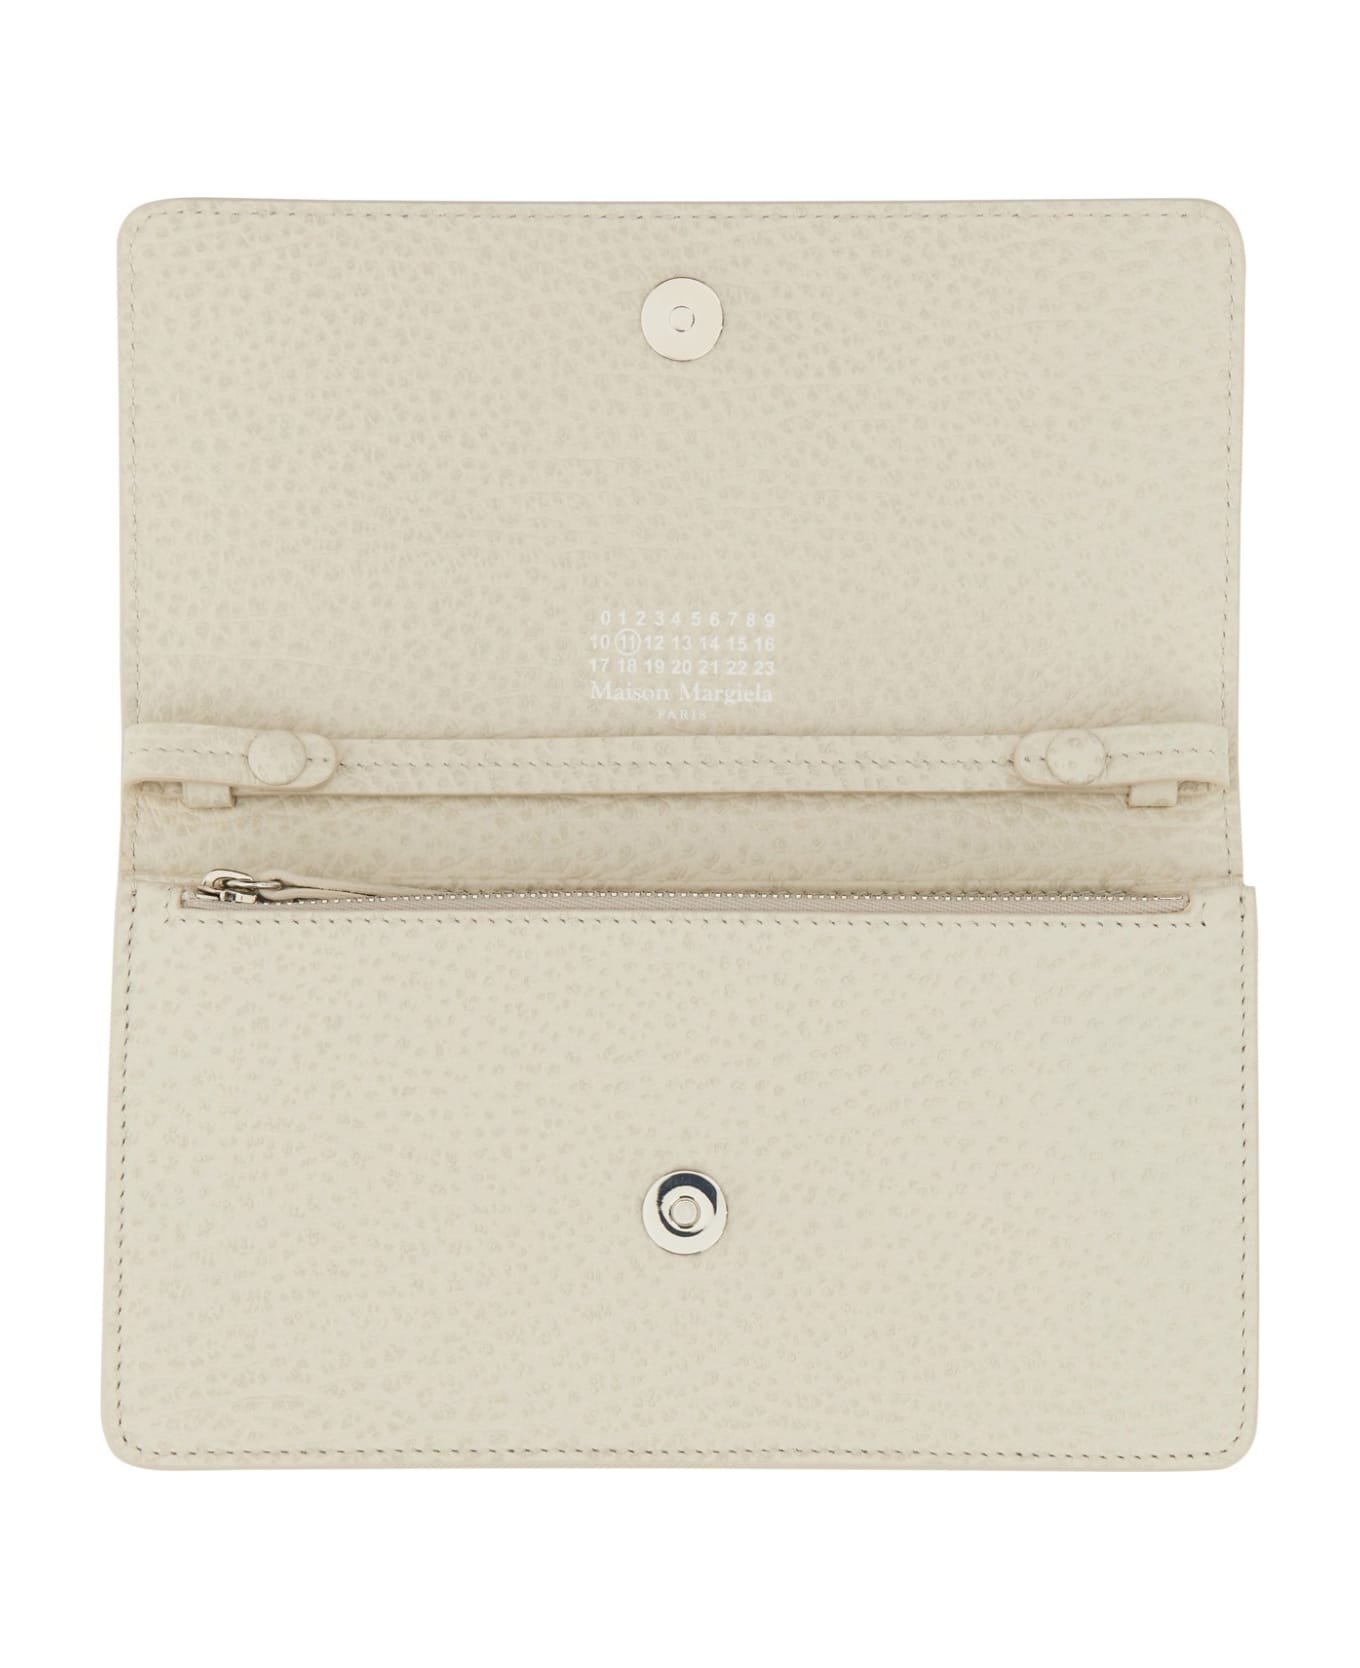 Maison Margiela Large Wallet With Chain - AVORIO